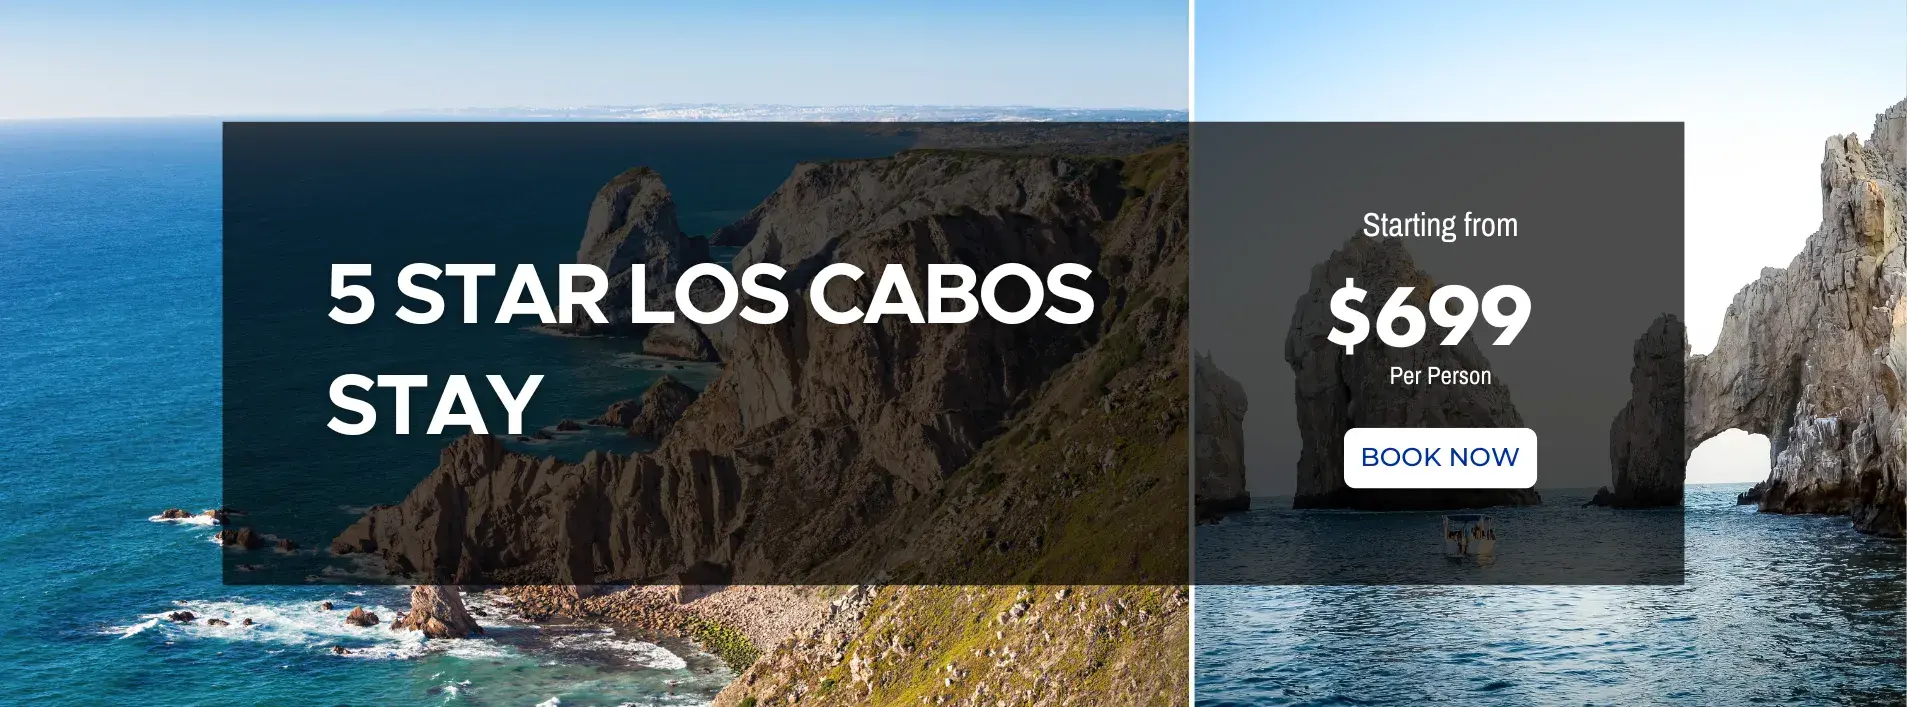 5 Star Los Cabos Stay W/Air and All-Inclusive